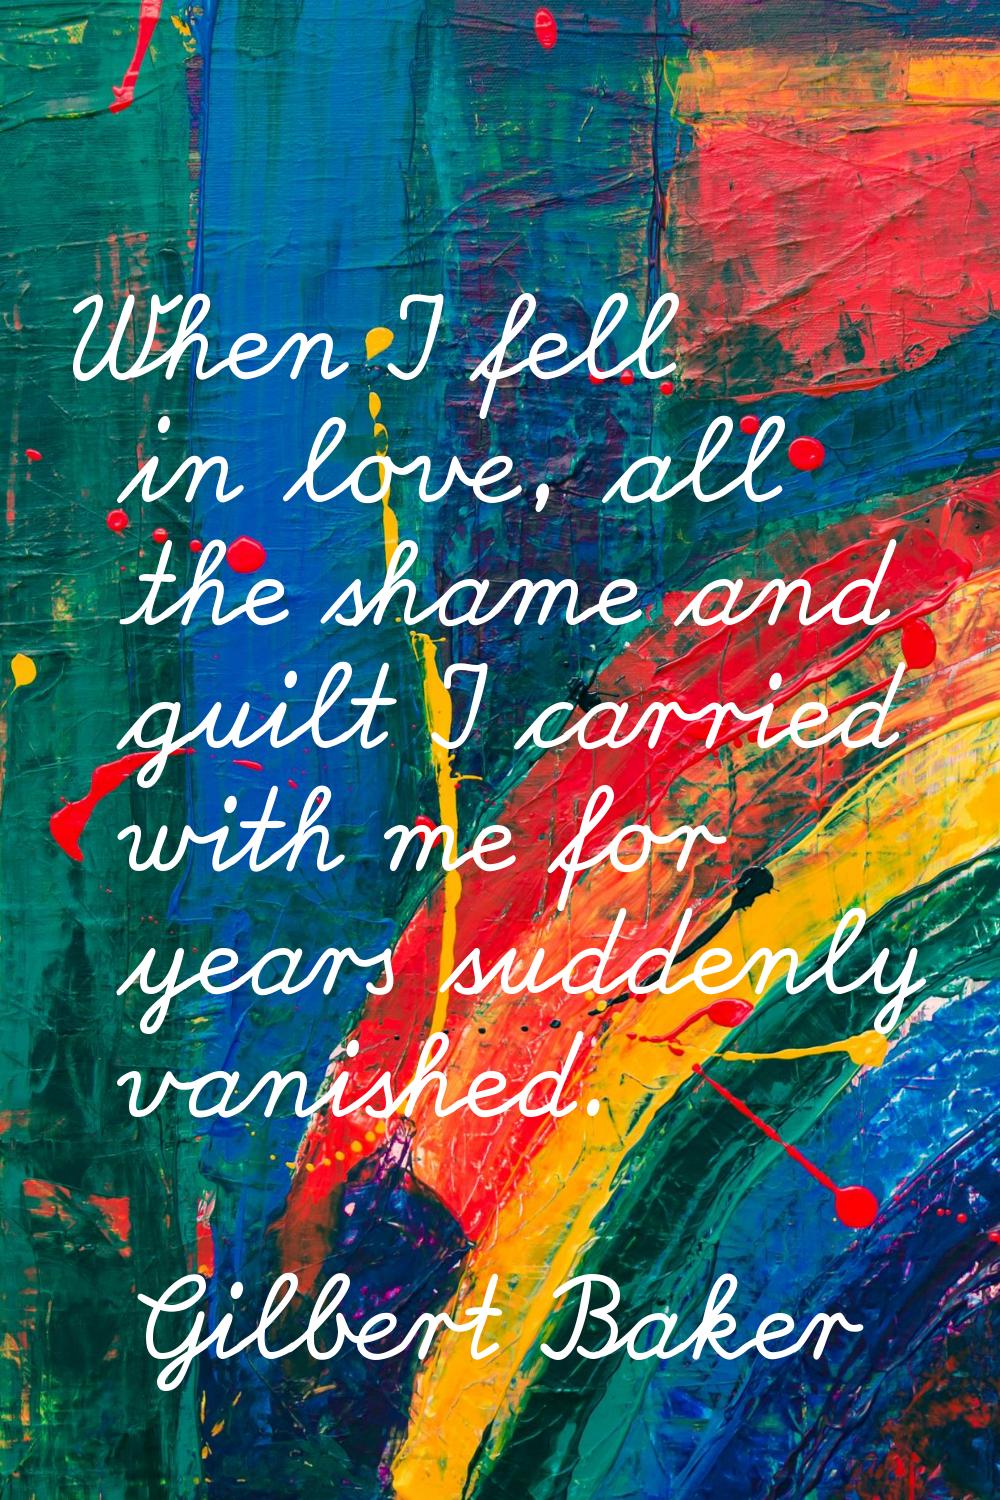 When I fell in love, all the shame and guilt I carried with me for years suddenly vanished.